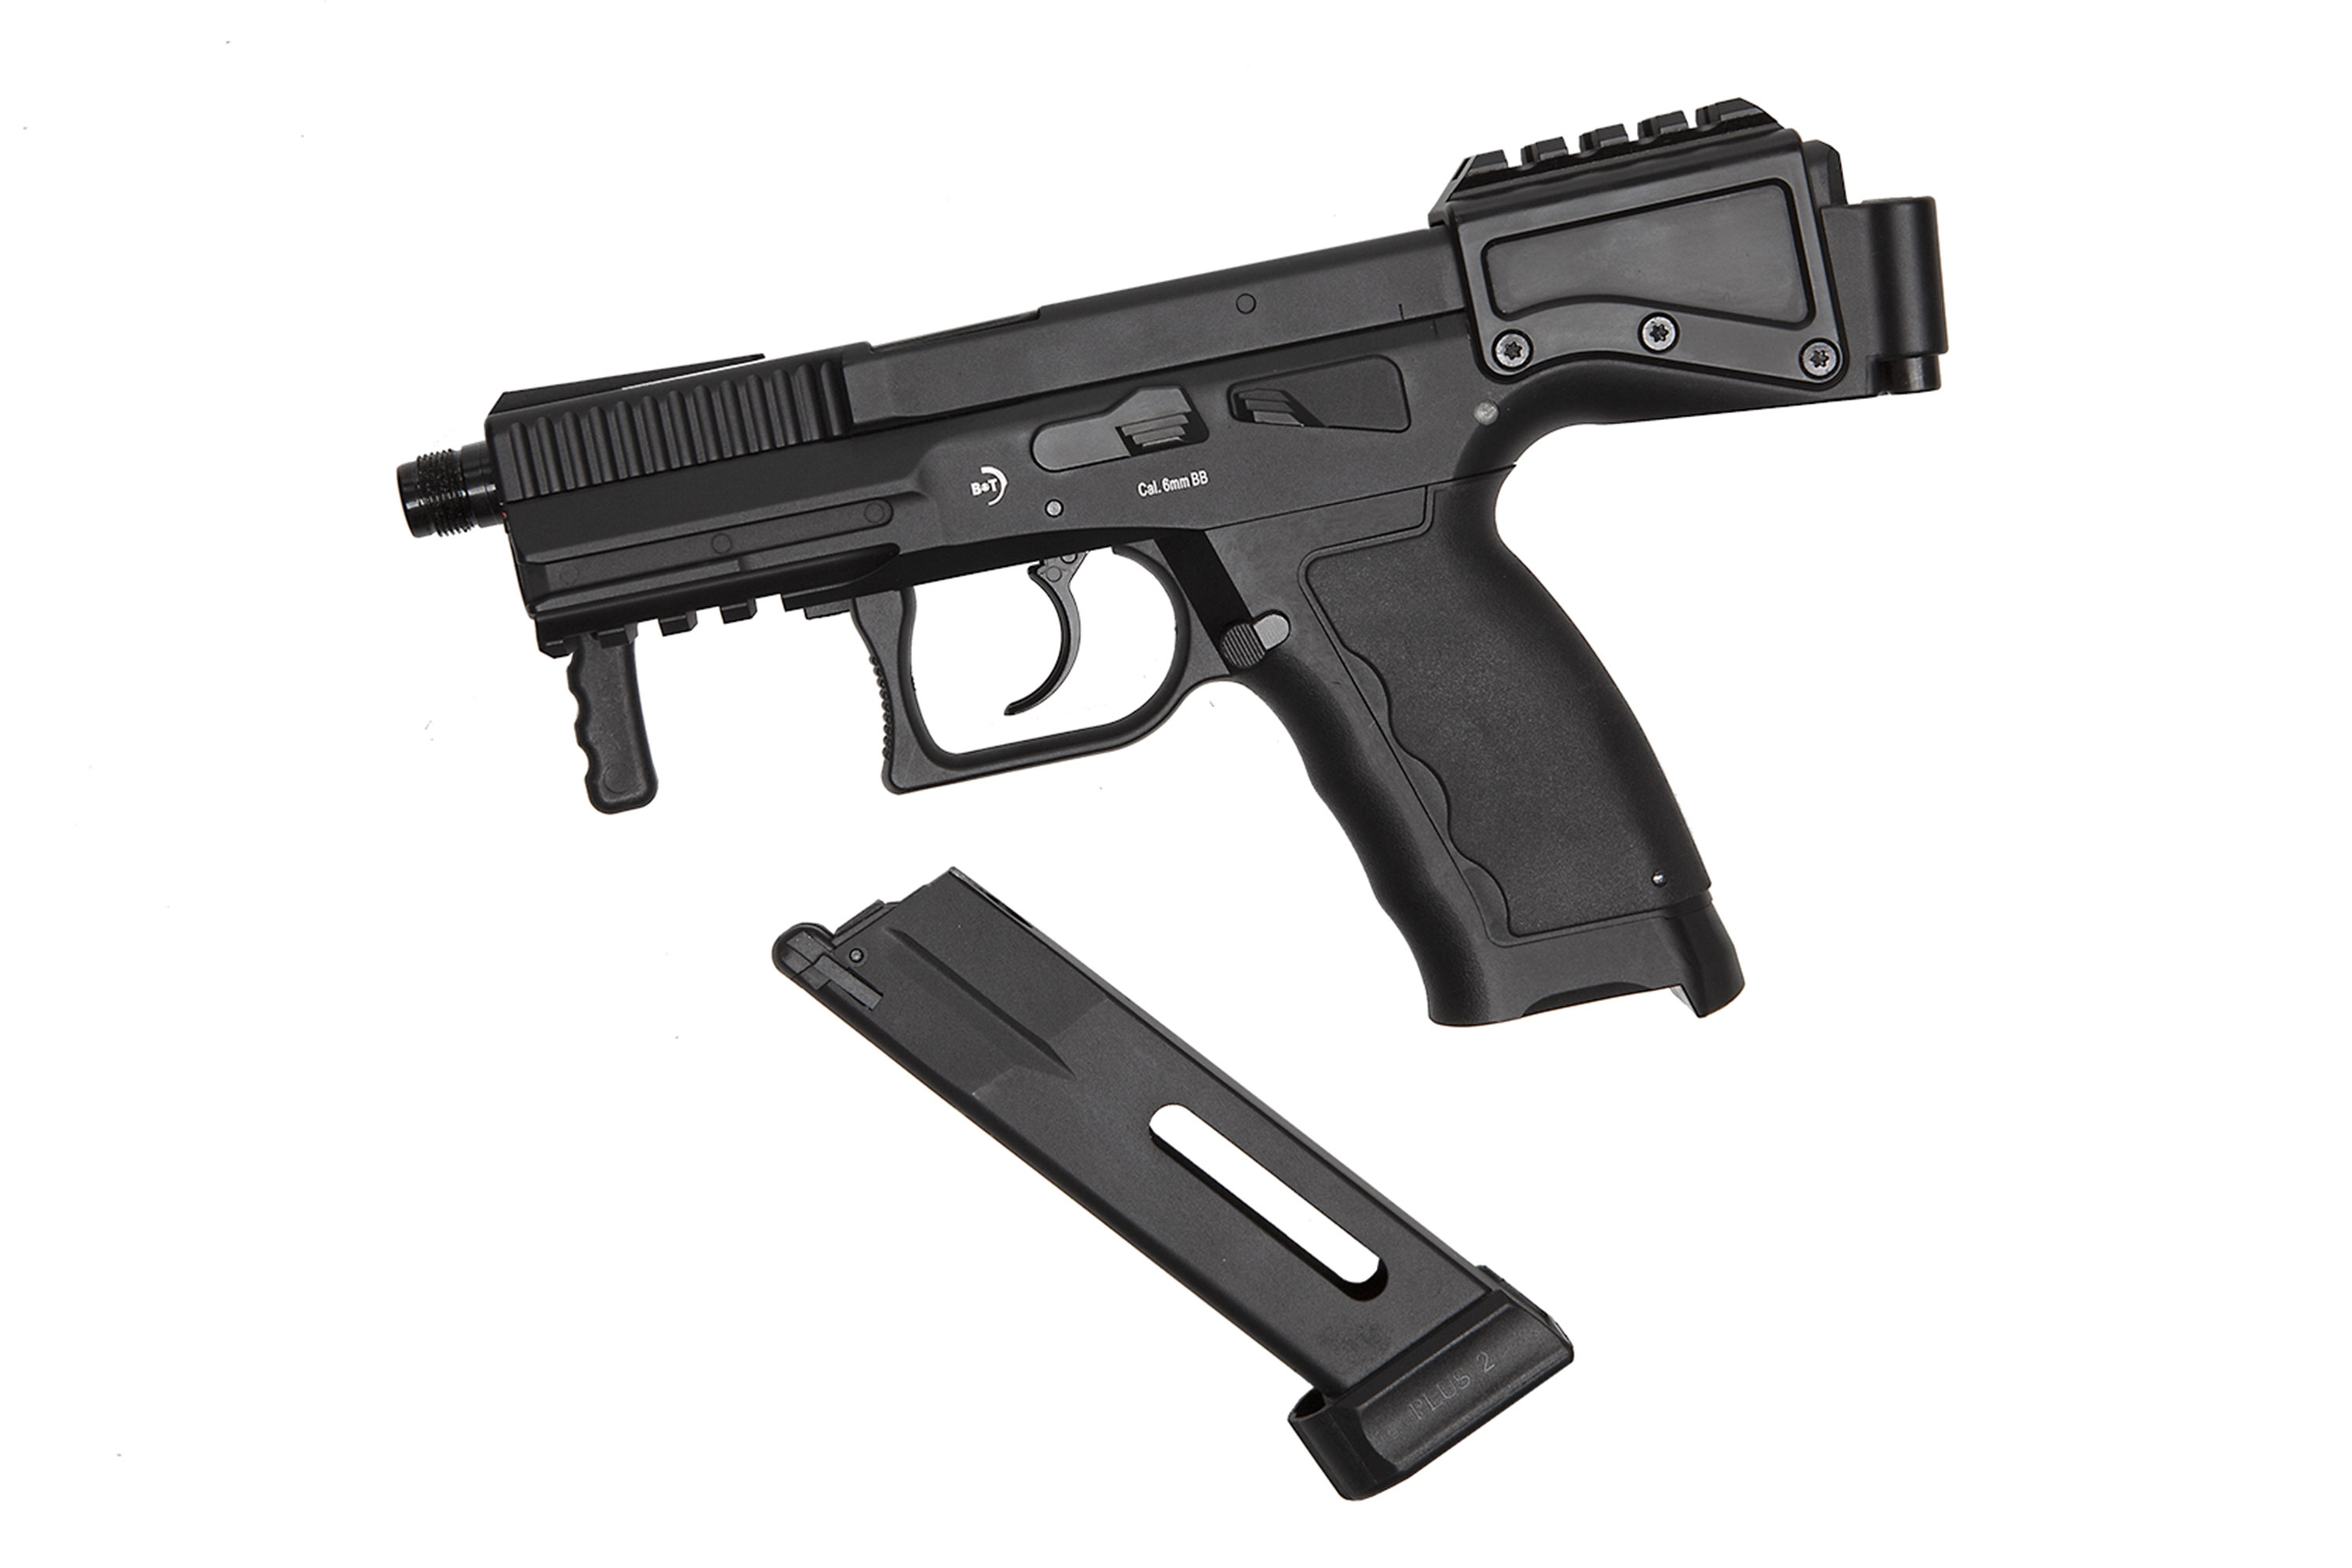 B&T USW A1 schwarz 6mm - Airsoft Co2 BlowBack